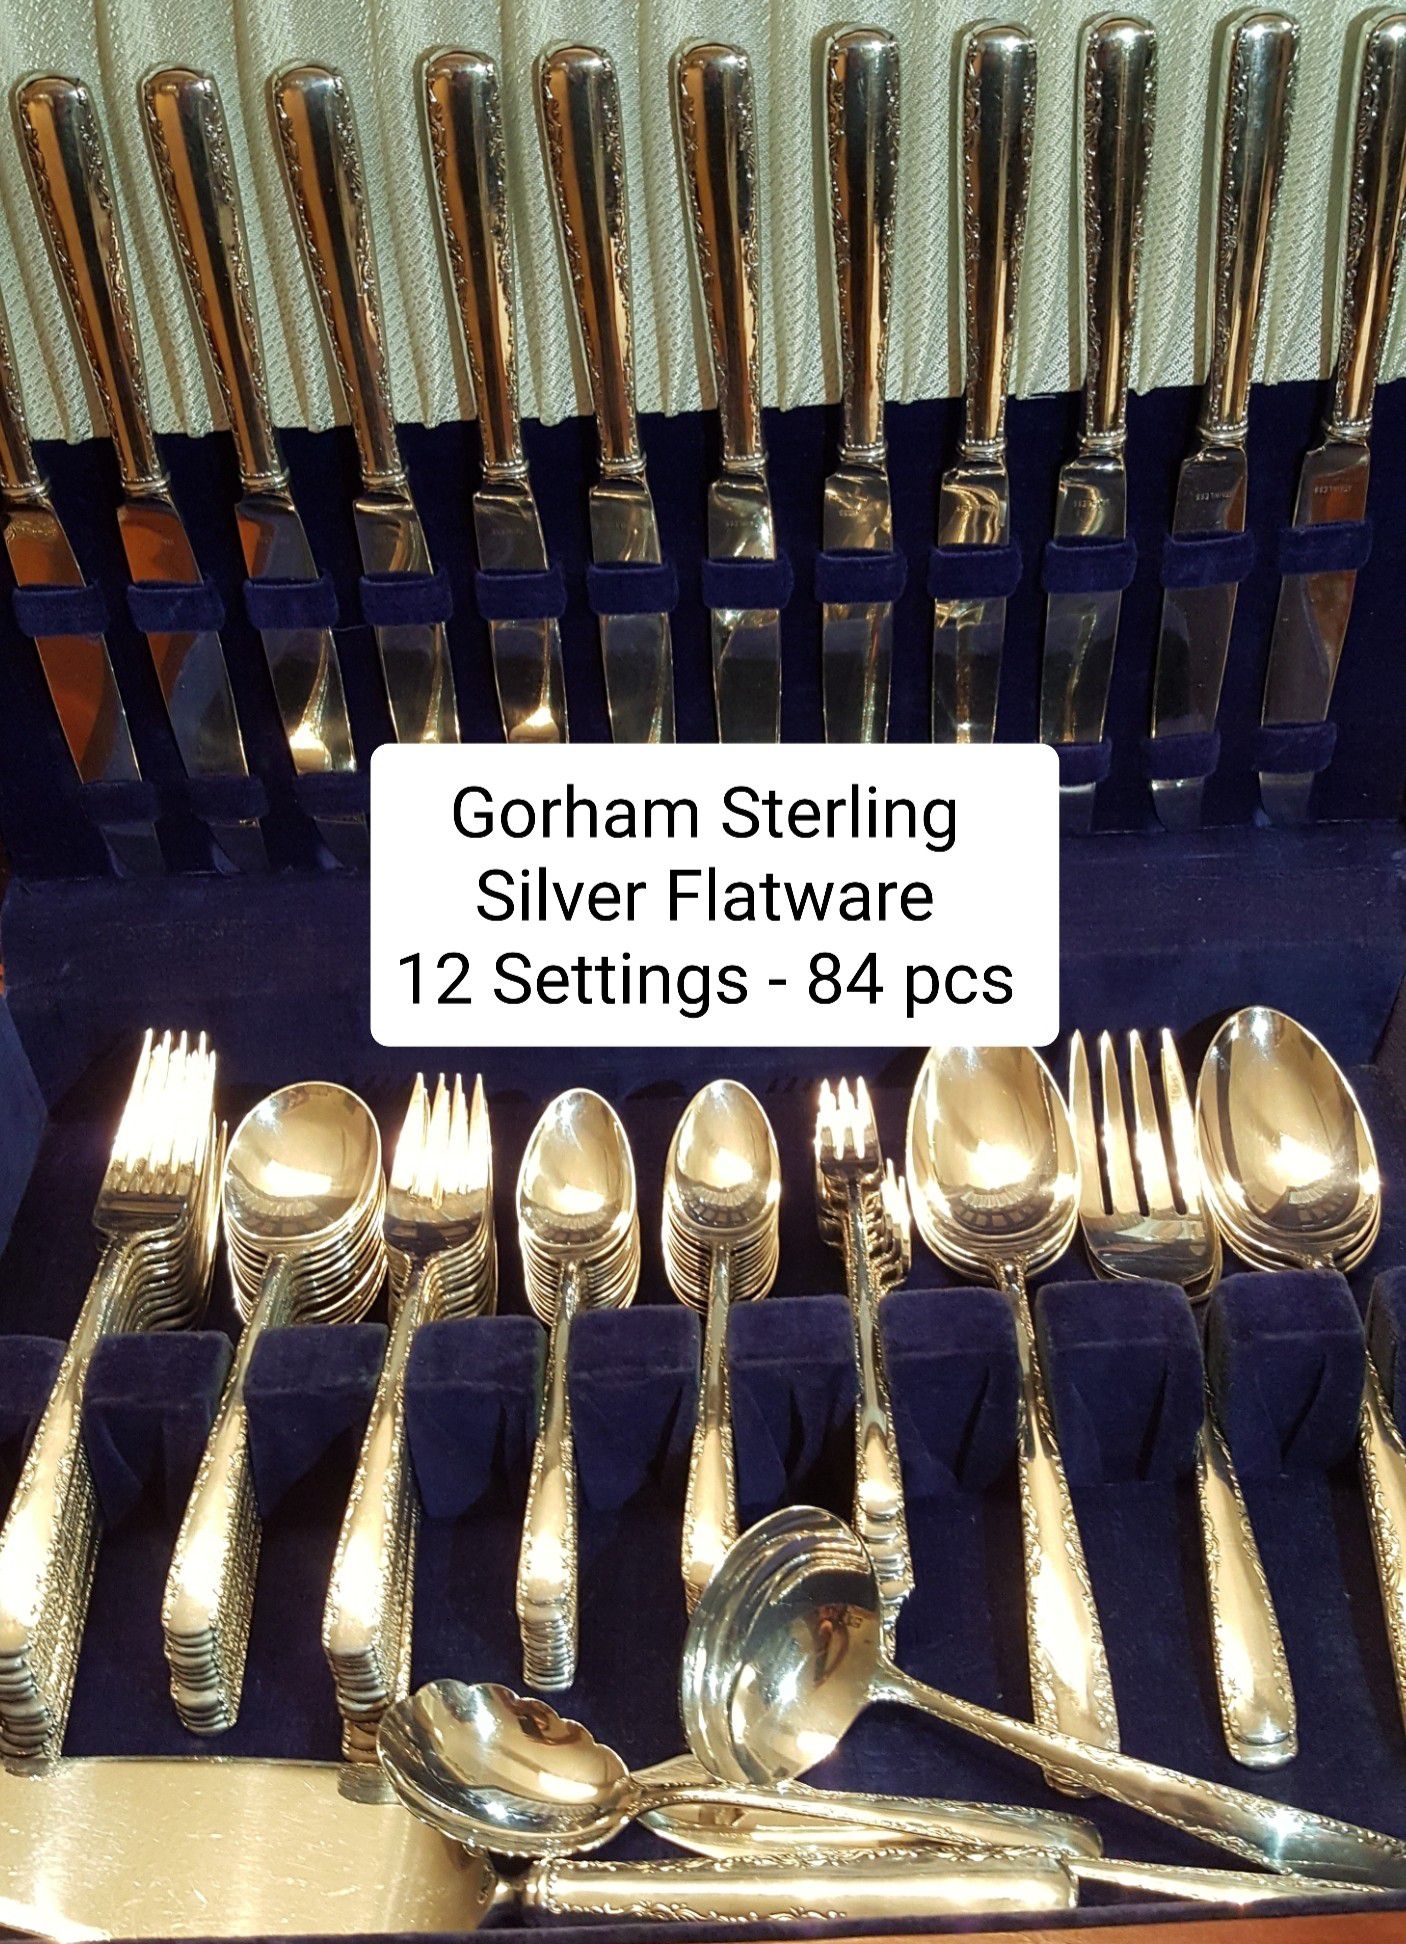 Gorham Sterling Silver Flatware - 12 Settings - 84 pieces - Includes serving pieces + Storage Box